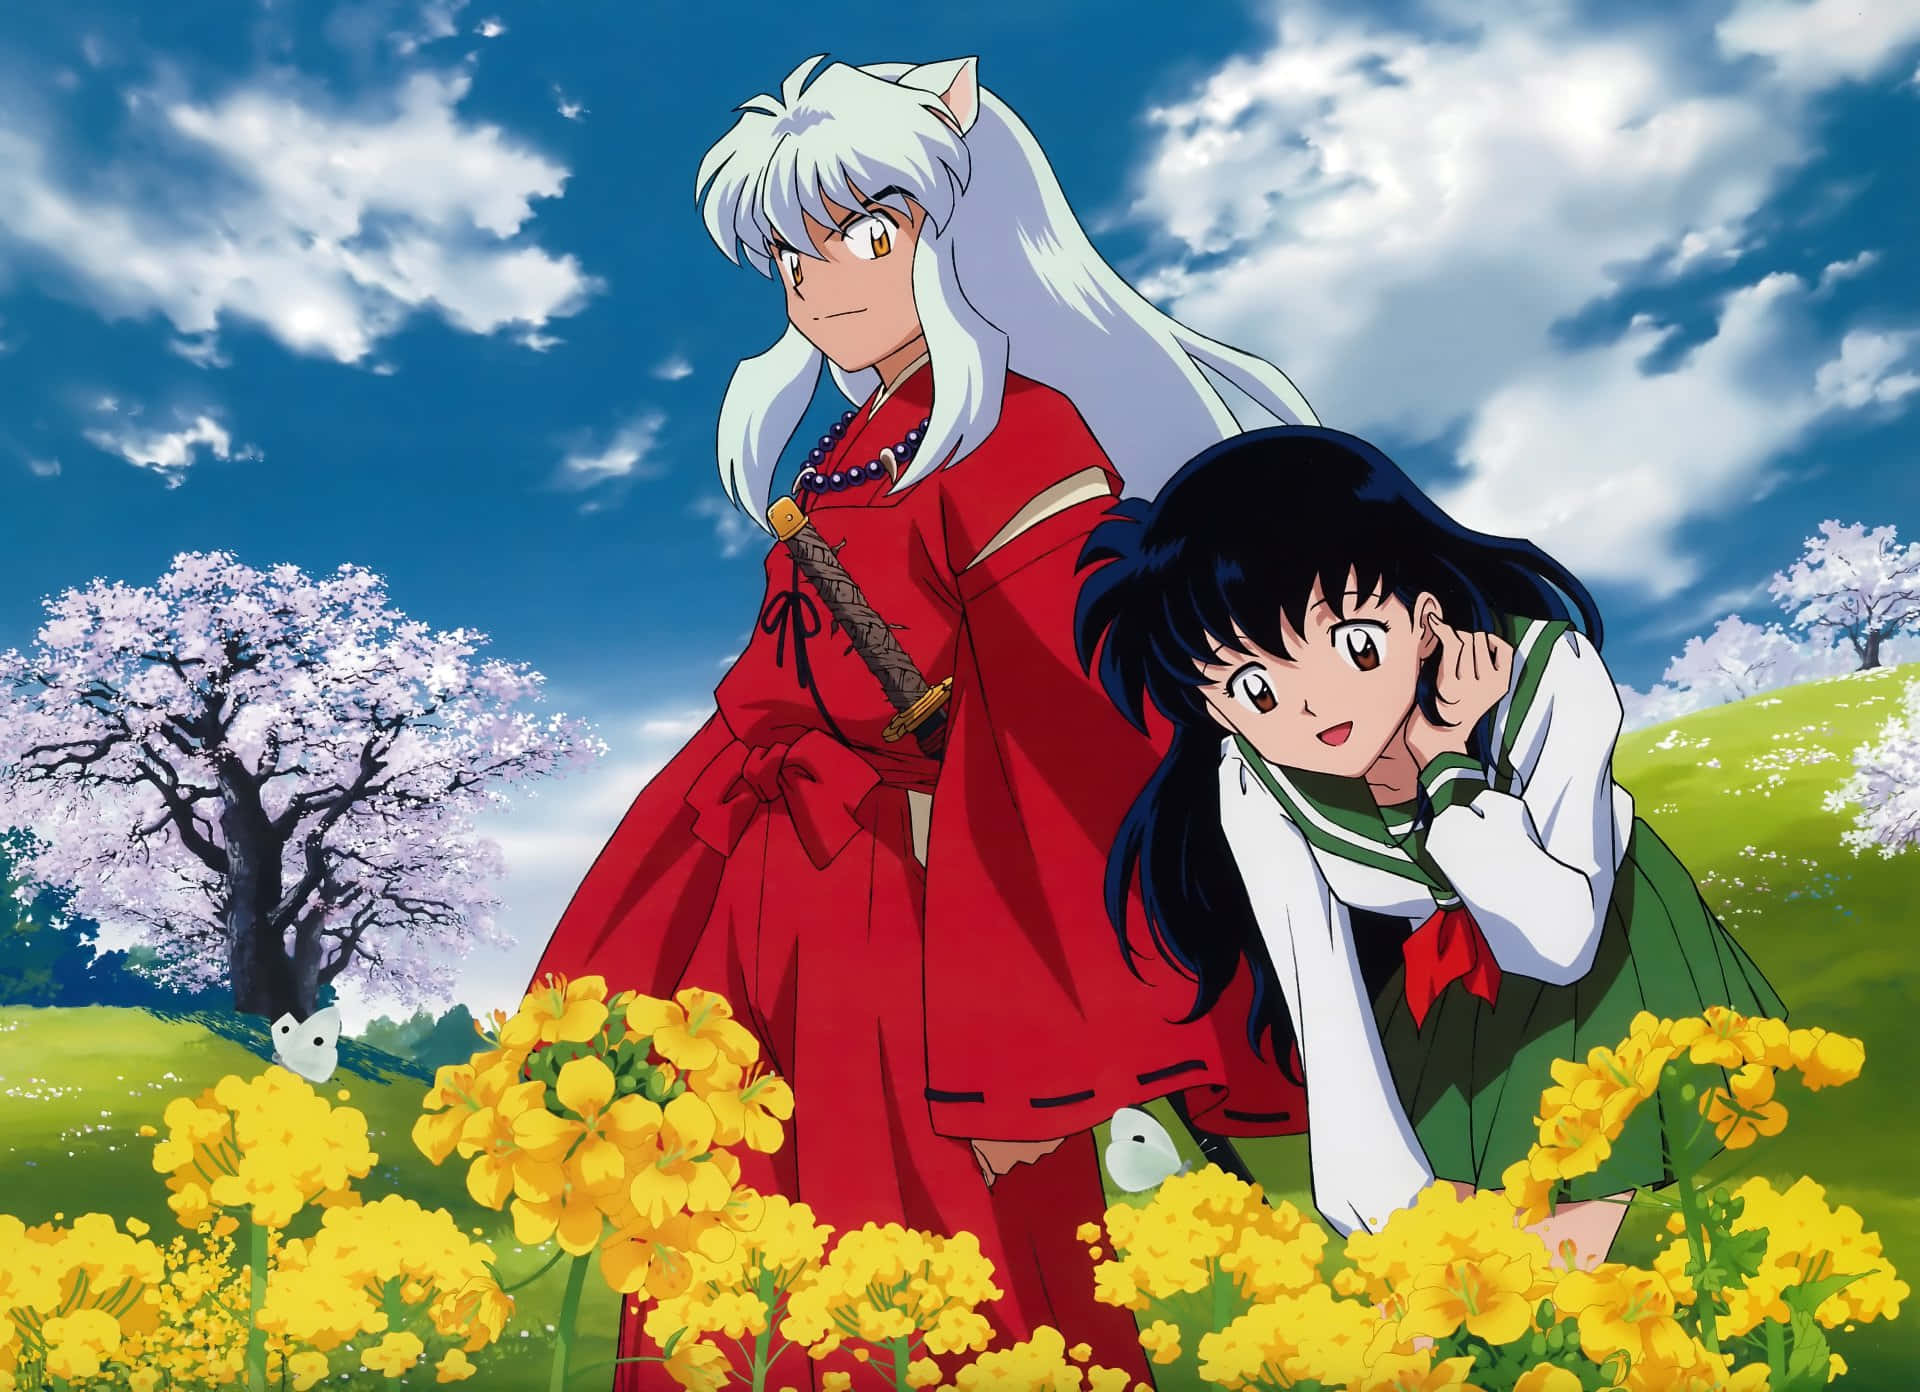 Inuyasha on his quest